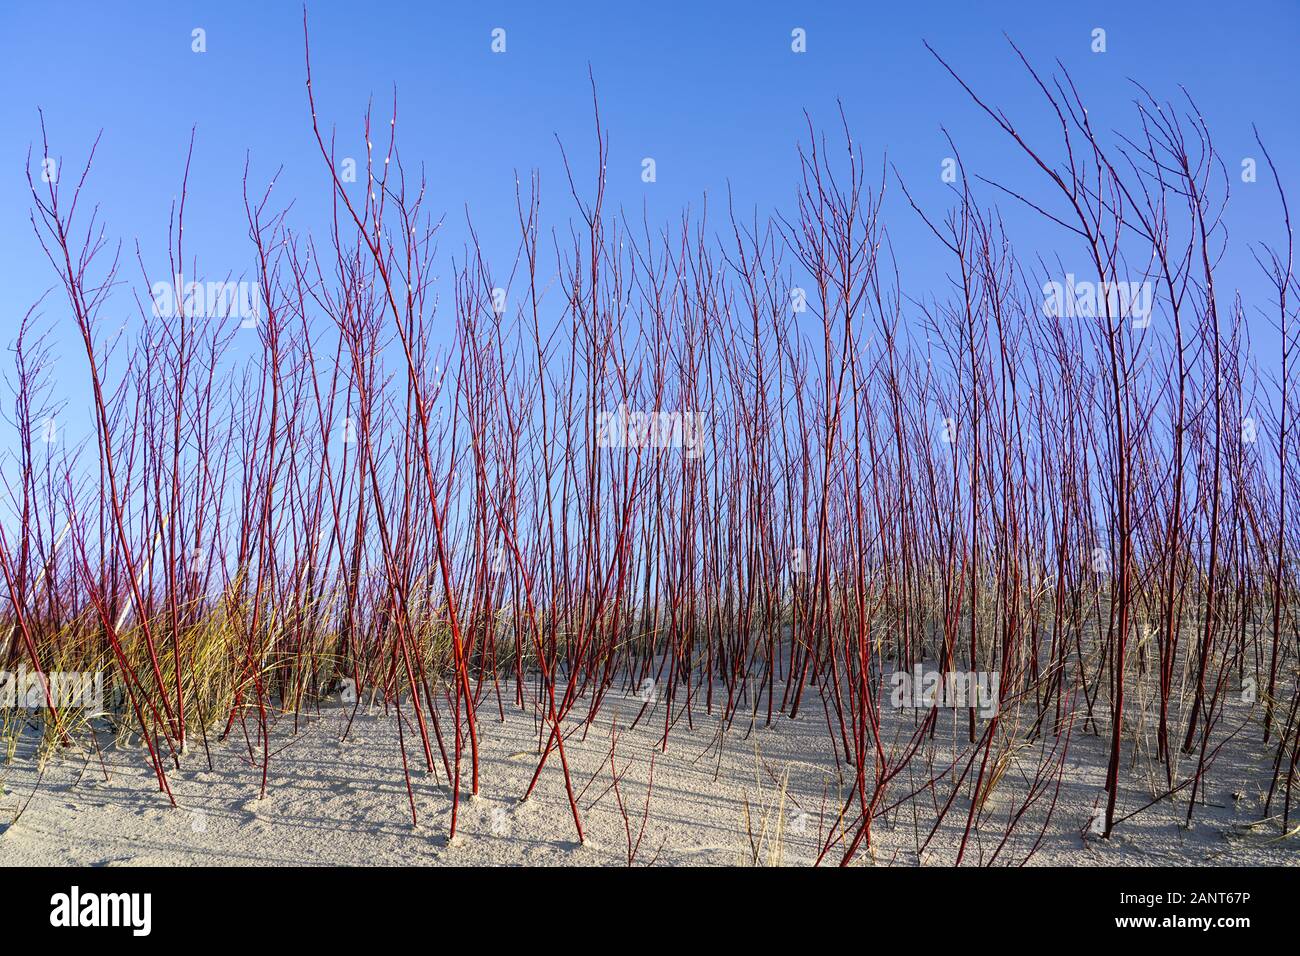 A shrubs of red and white willows at the baltic sea shore Stock Photo